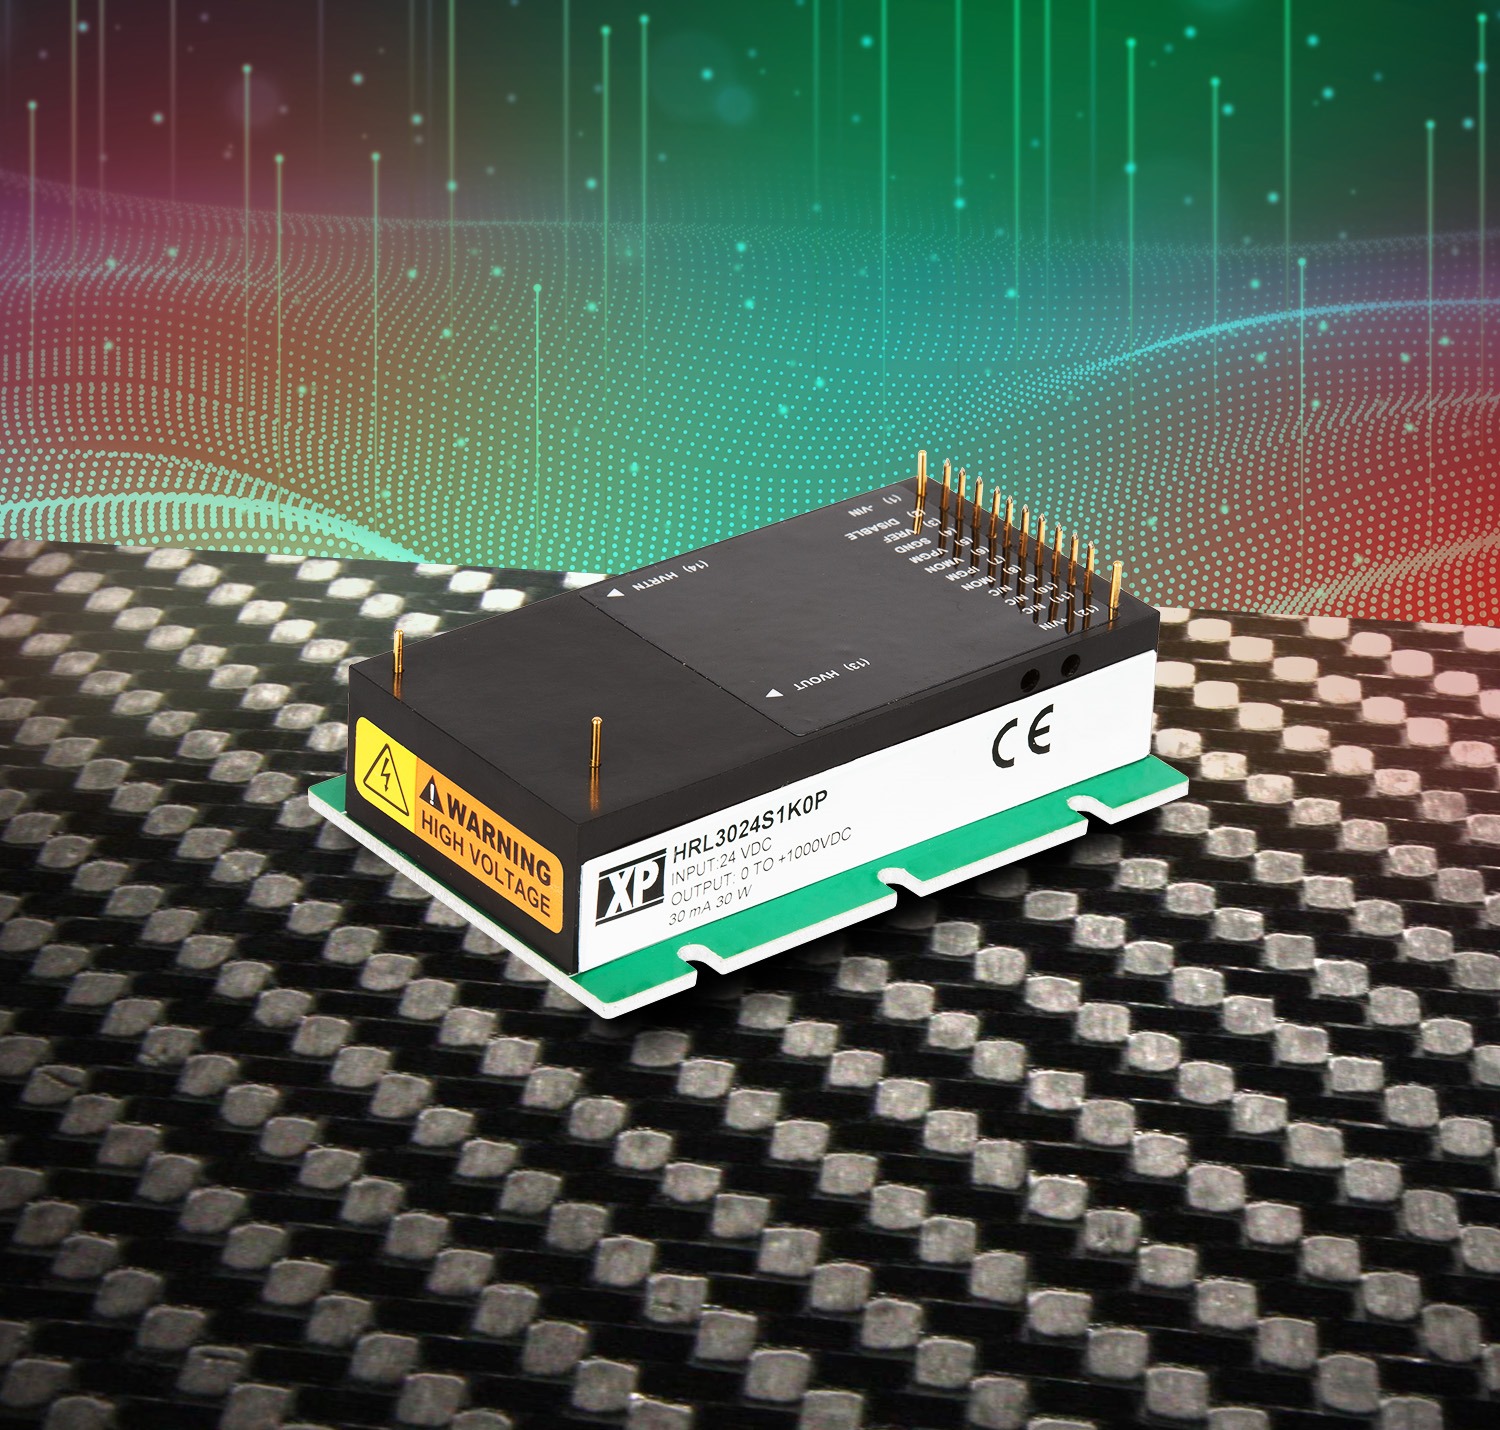 High-Voltage DC-DC Power Module for Scientific Applications